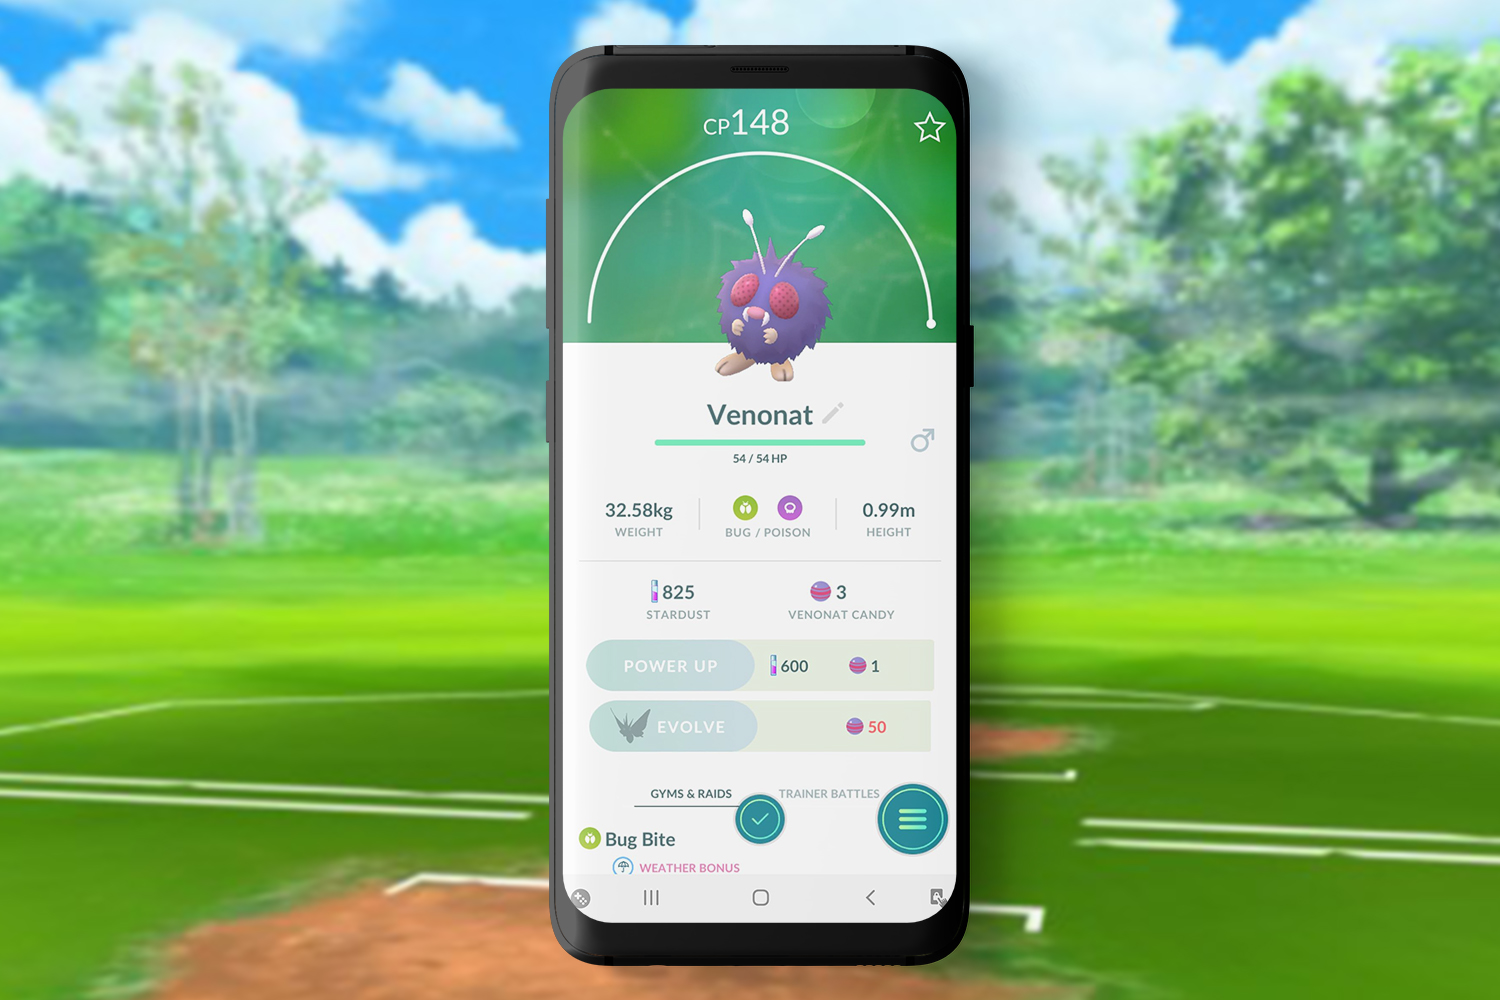 2023] How To Catch Ditto Pokemon Go Quickly? Here's the Answer